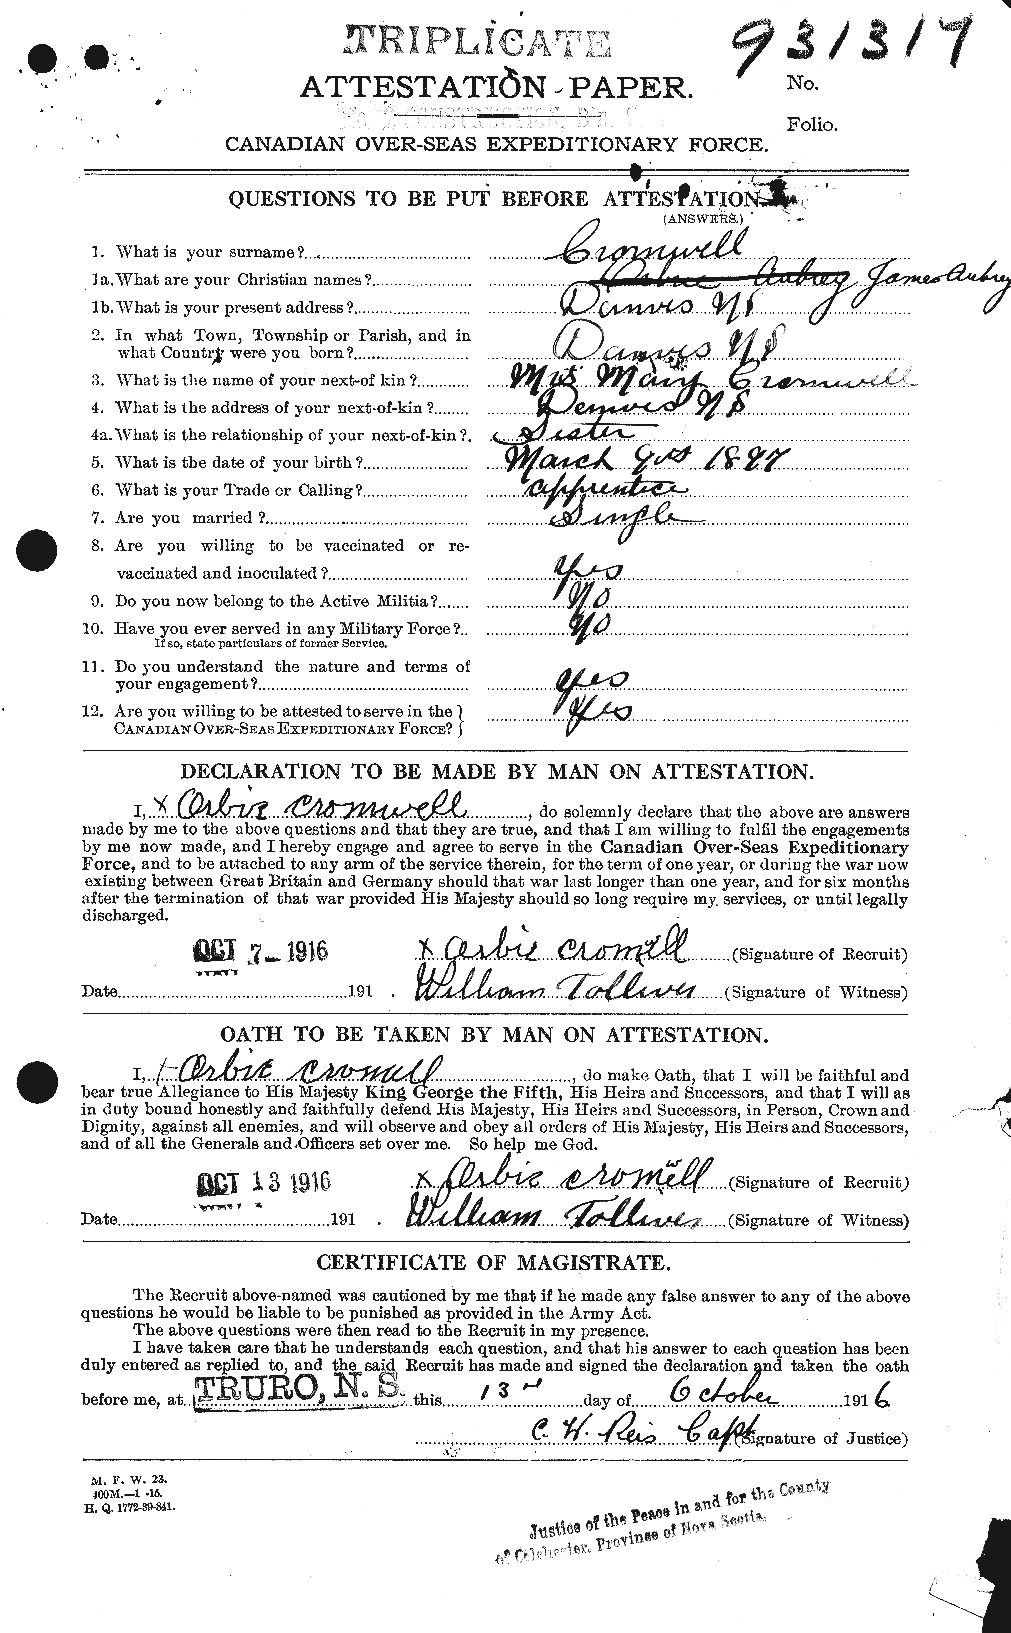 Personnel Records of the First World War - CEF 064925a